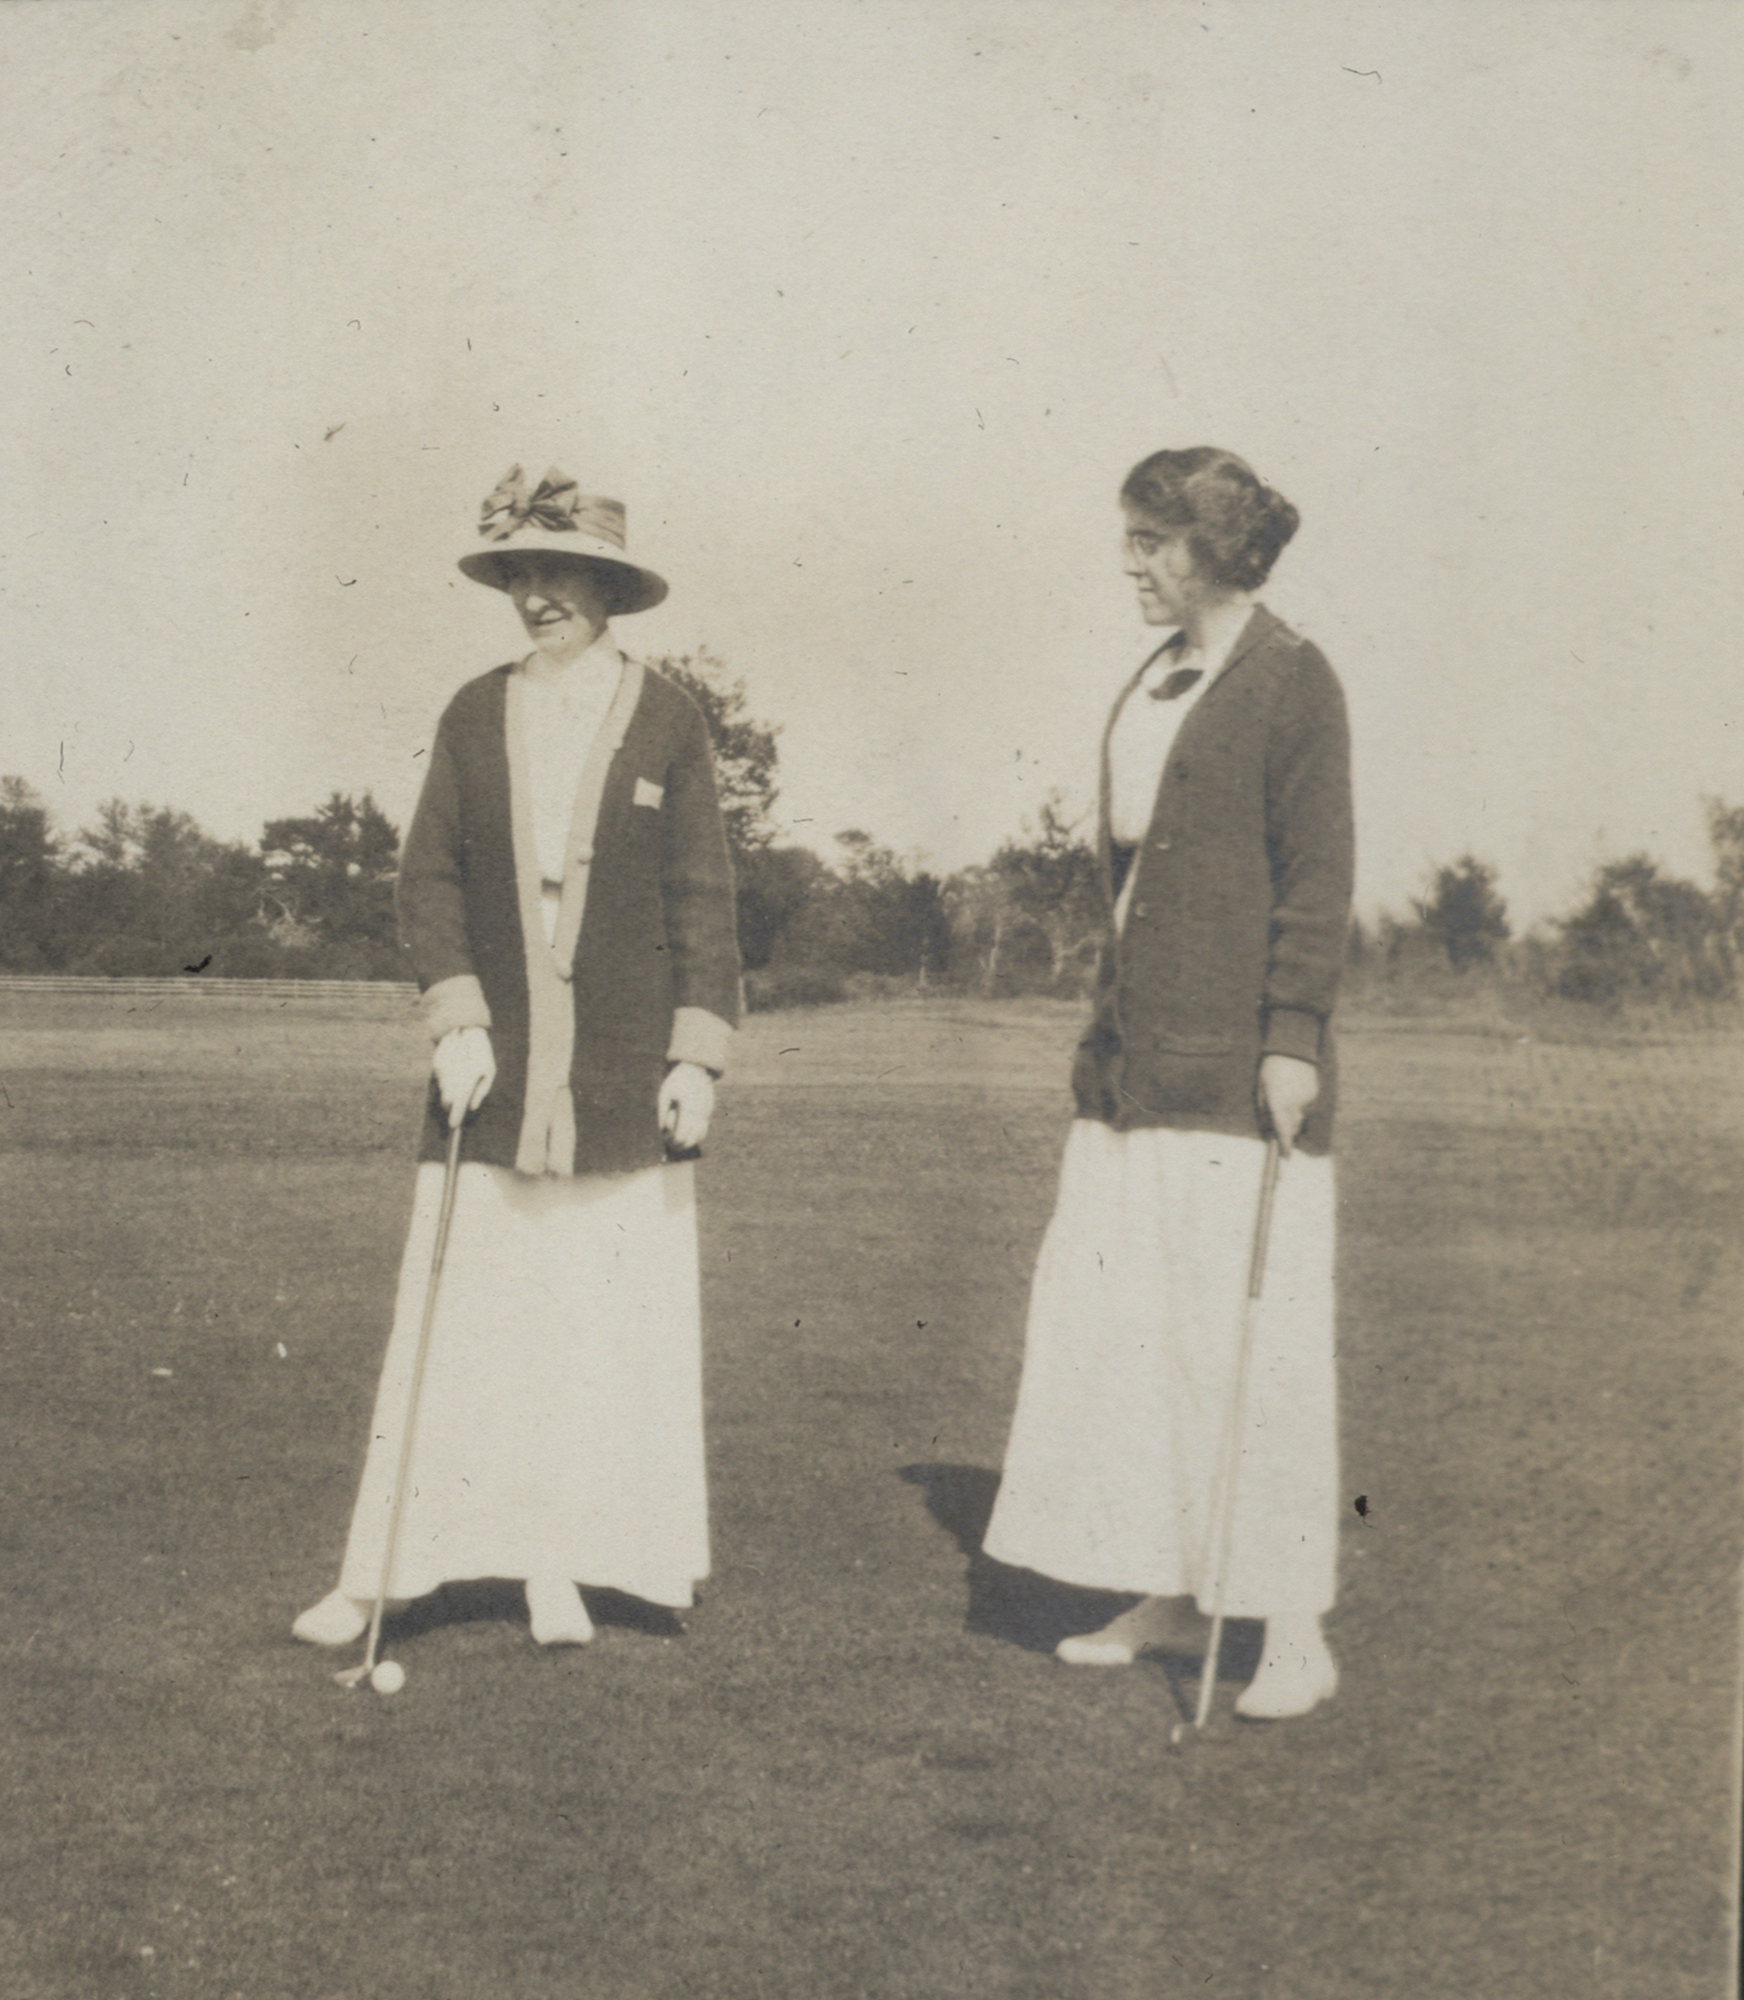 Photo of two women in the early 1900s, playing golf. They are both wearing long white skirts, with white shoes, white blouses, and cardigans that are hip-length and are buttoned in front near the waist. The woman on the left is wearing a sun hat with a wide brim and big bow in front, while the woman on the right wears no hat, her hair pulled back into a bun. The are each leaning slightly on their golf clubs which are perpendicular to the ground. The woman on the right appears to be lining up her ball.